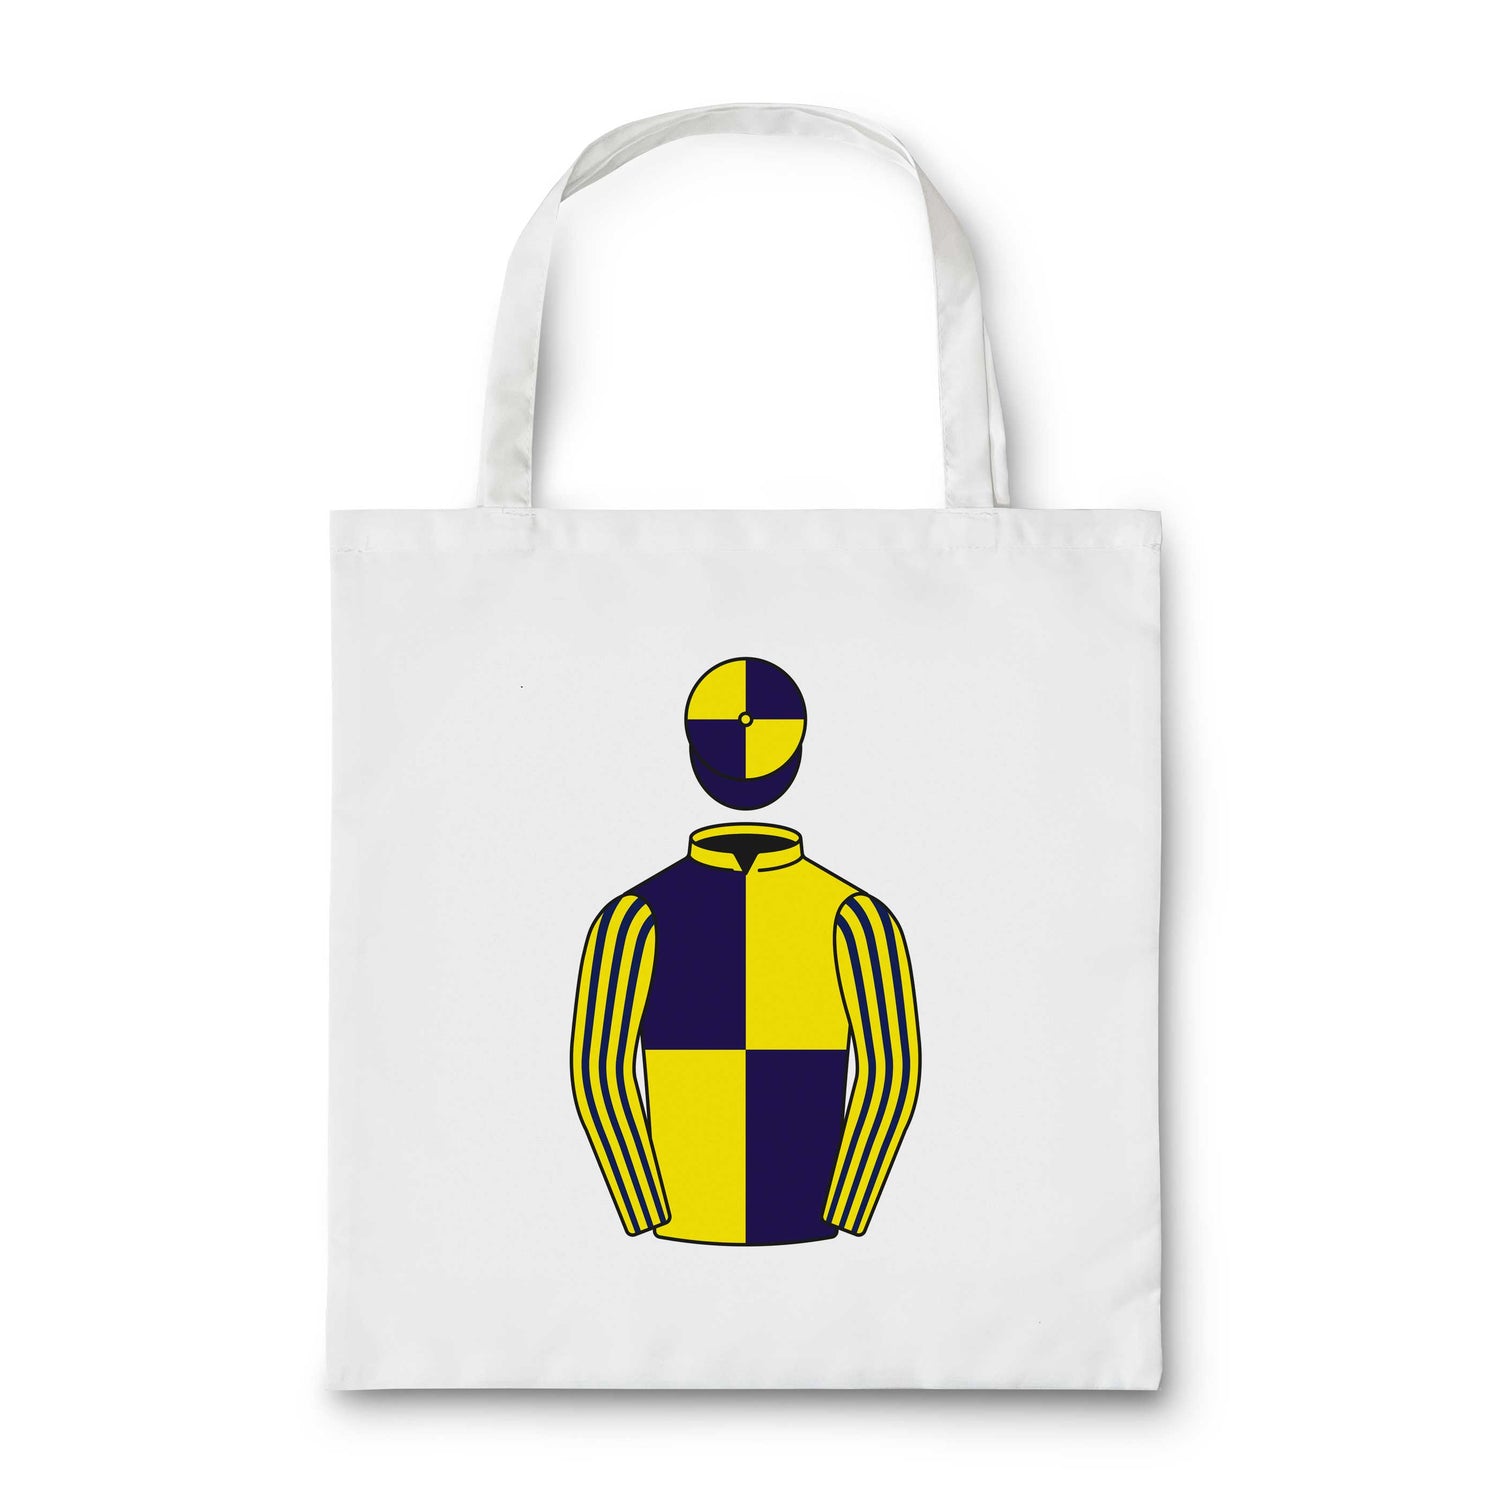 Paul And Clare Rooney Tote Bag - Tote Bag - Hacked Up